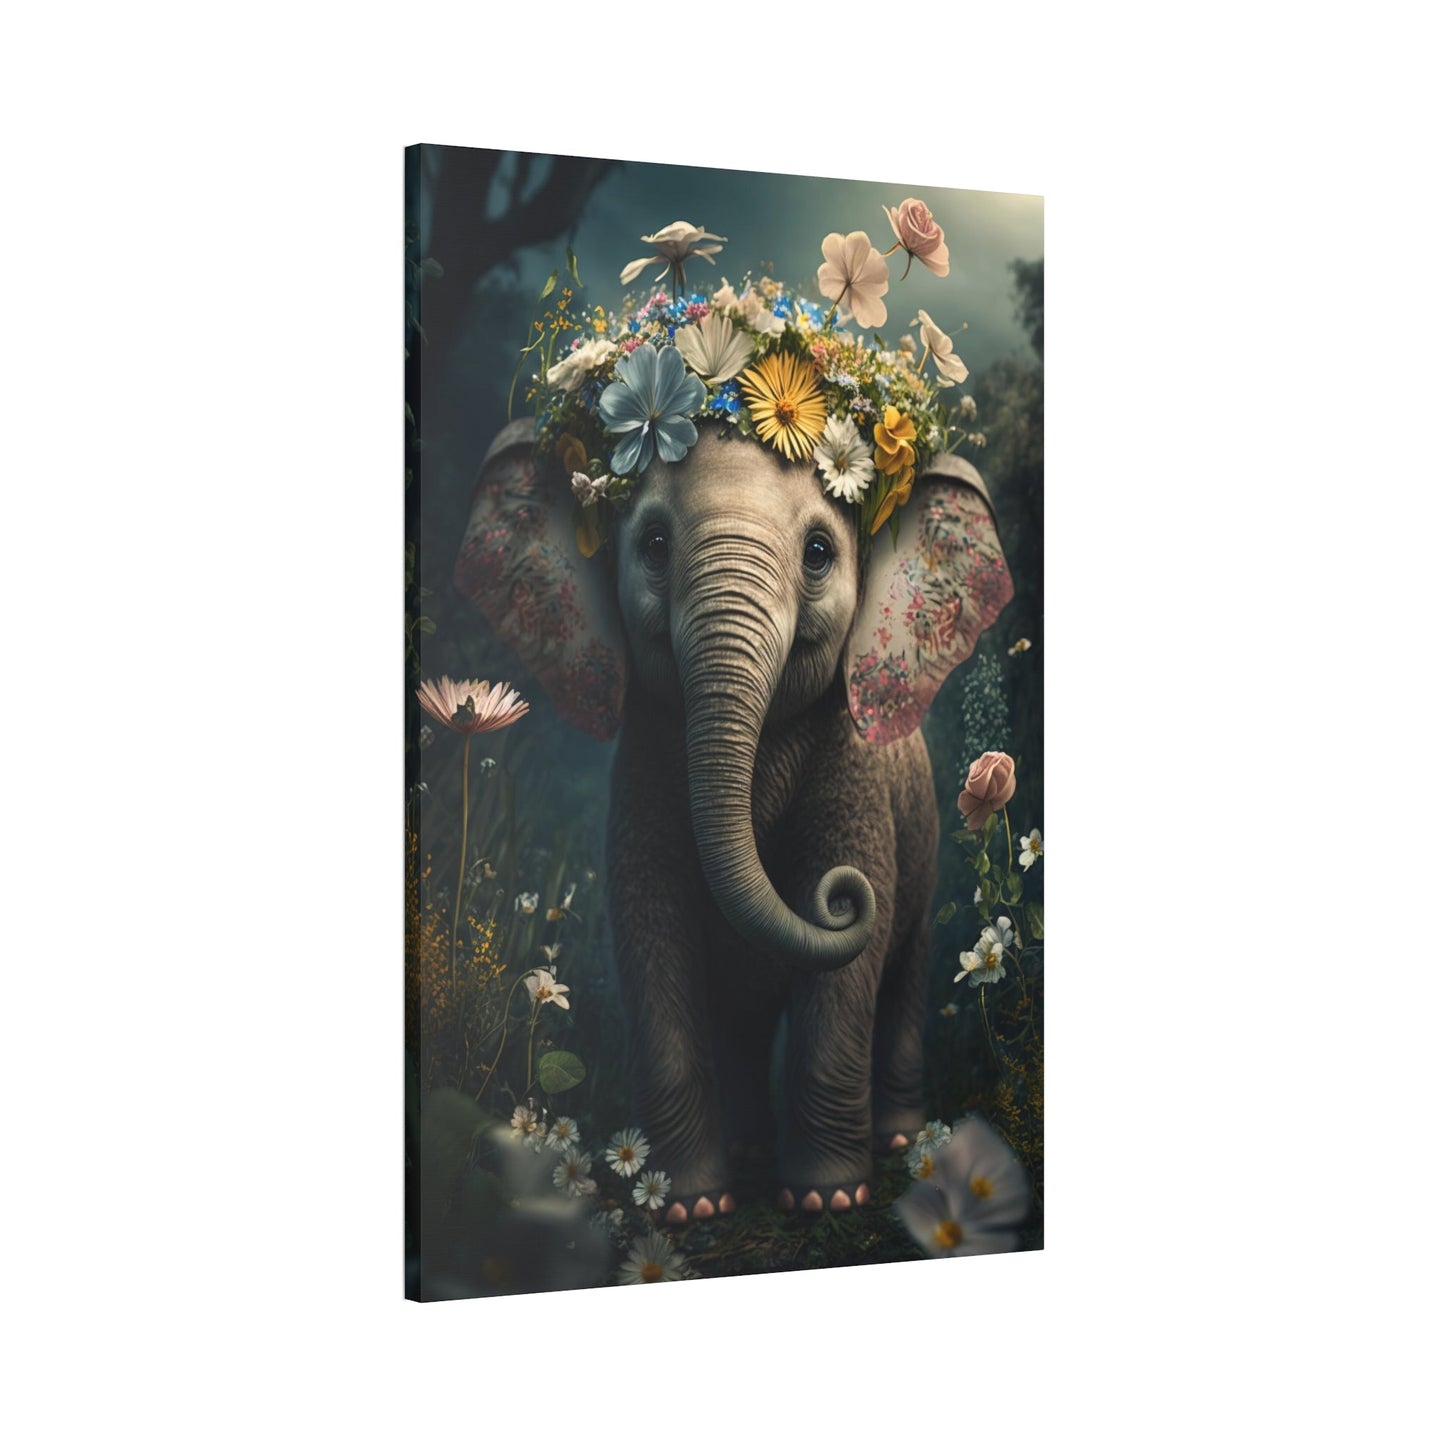 Jungle Majesty: Canvas Print of Elephants and Exotic Plants